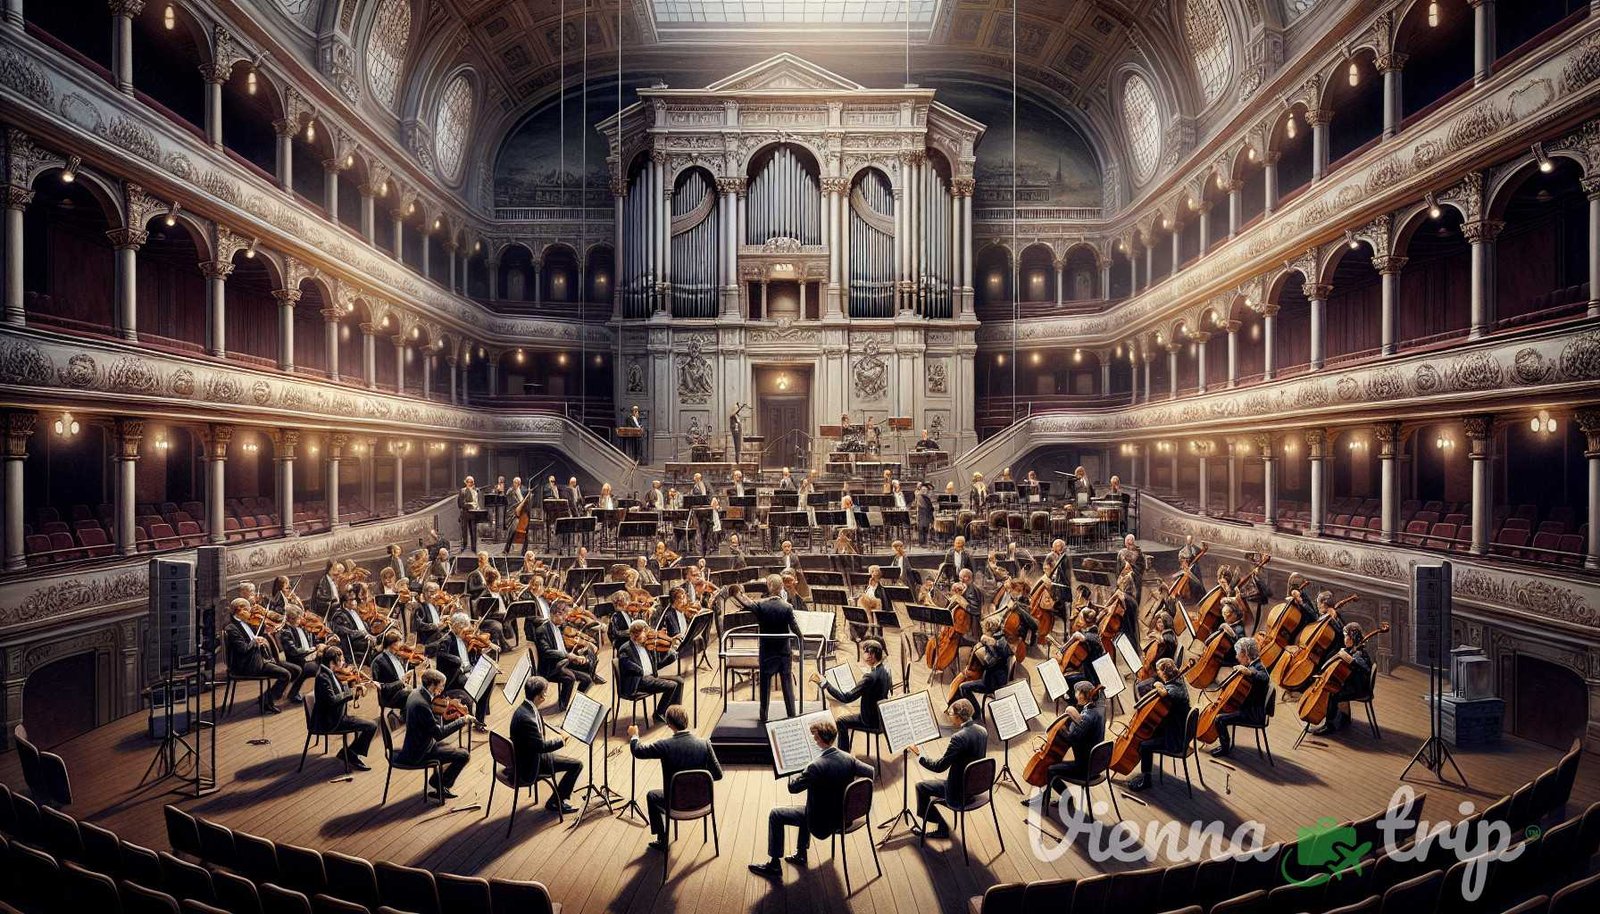 Illustration for section: Vienna's Musikverein and Konzerthaus are iconic concert halls that host world-class orchestras and m - vienna rhythm